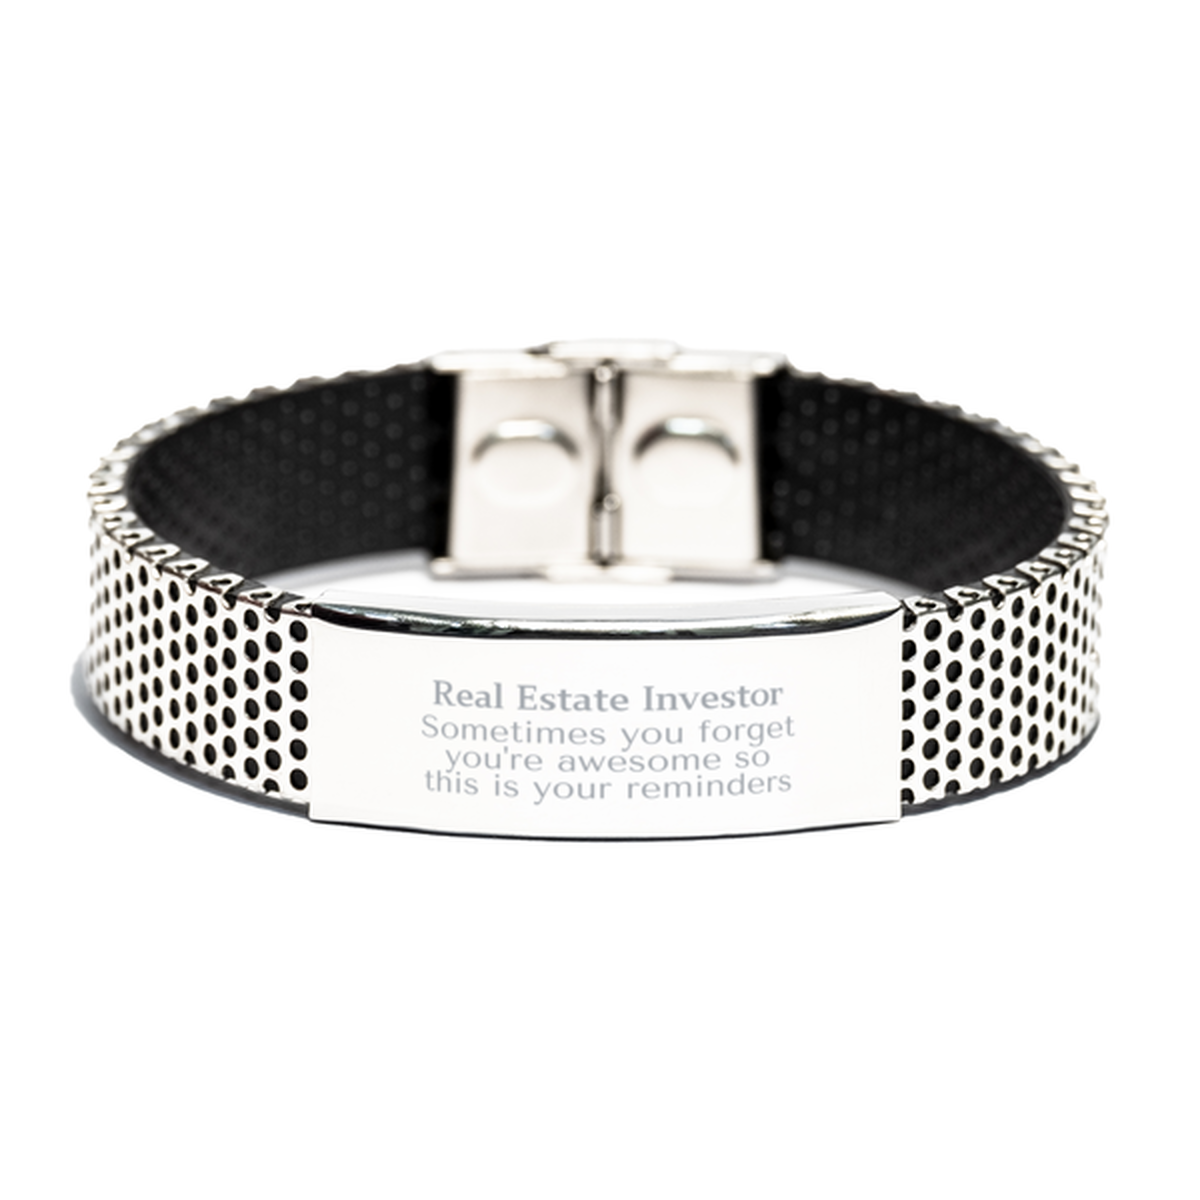 Sentimental Real Estate Investor Stainless Steel Bracelet, Real Estate Investor Sometimes you forget you're awesome so this is your reminders, Graduation Christmas Birthday Gifts for Real Estate Investor, Men, Women, Coworkers